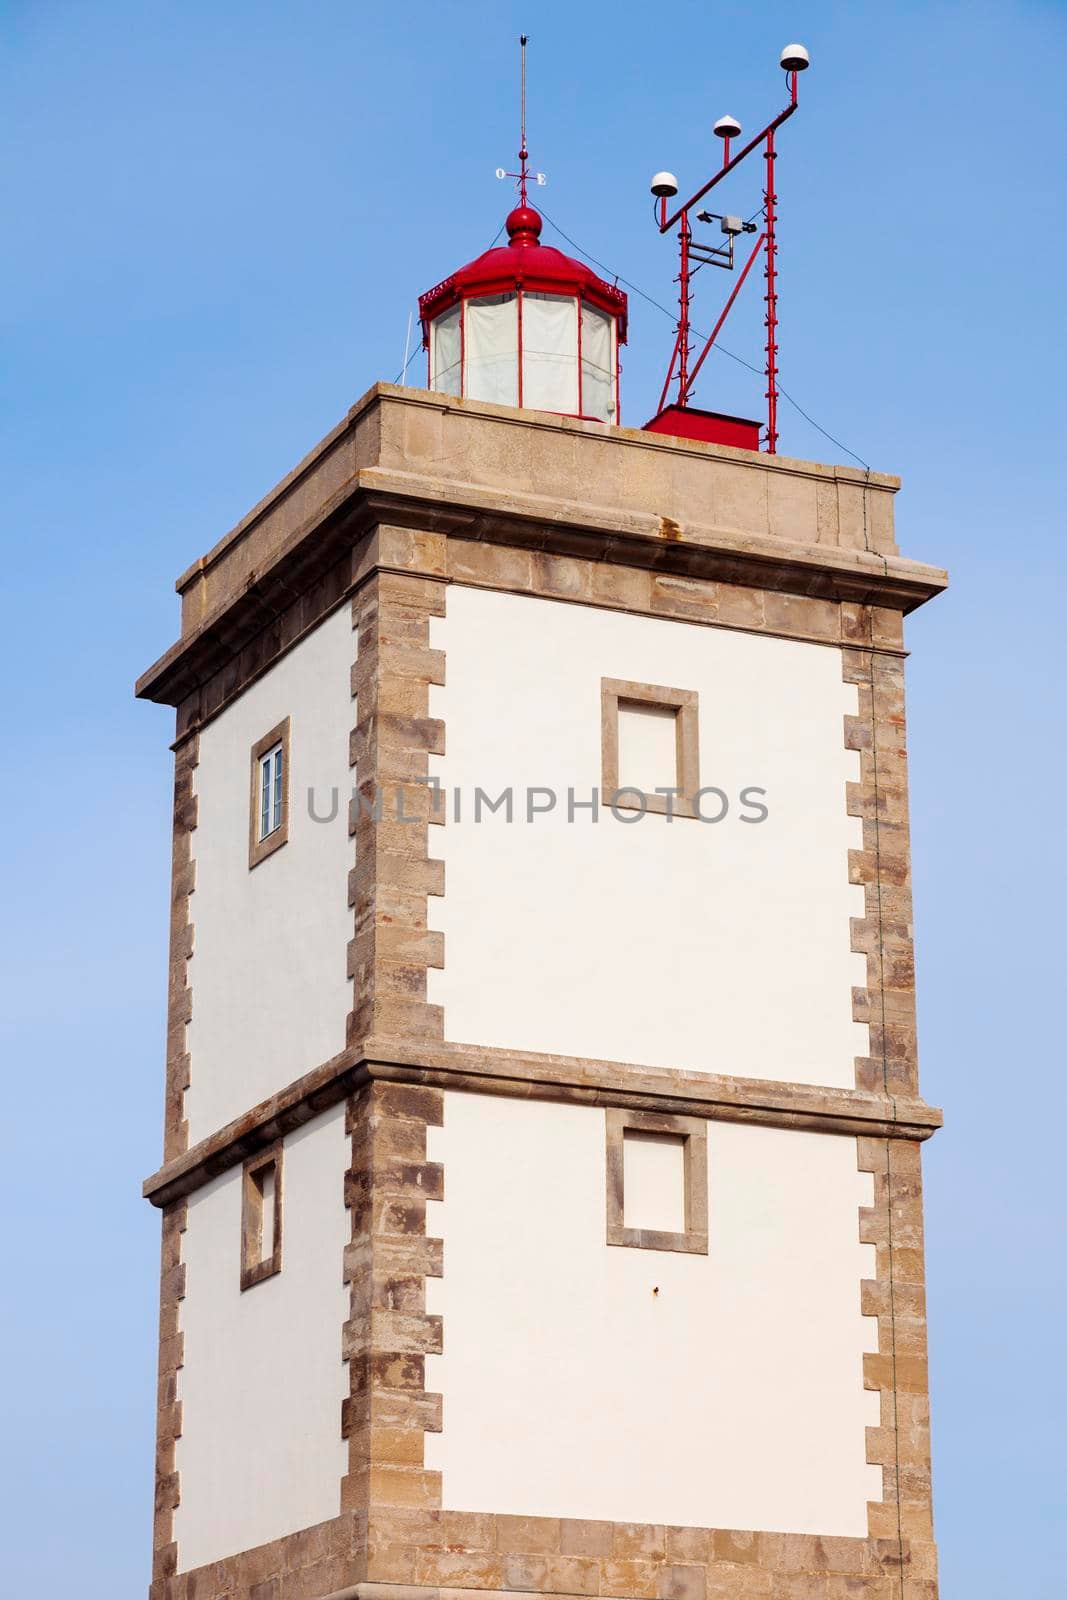 Cabo Carvoeiro Lighthouse in Portugal by benkrut